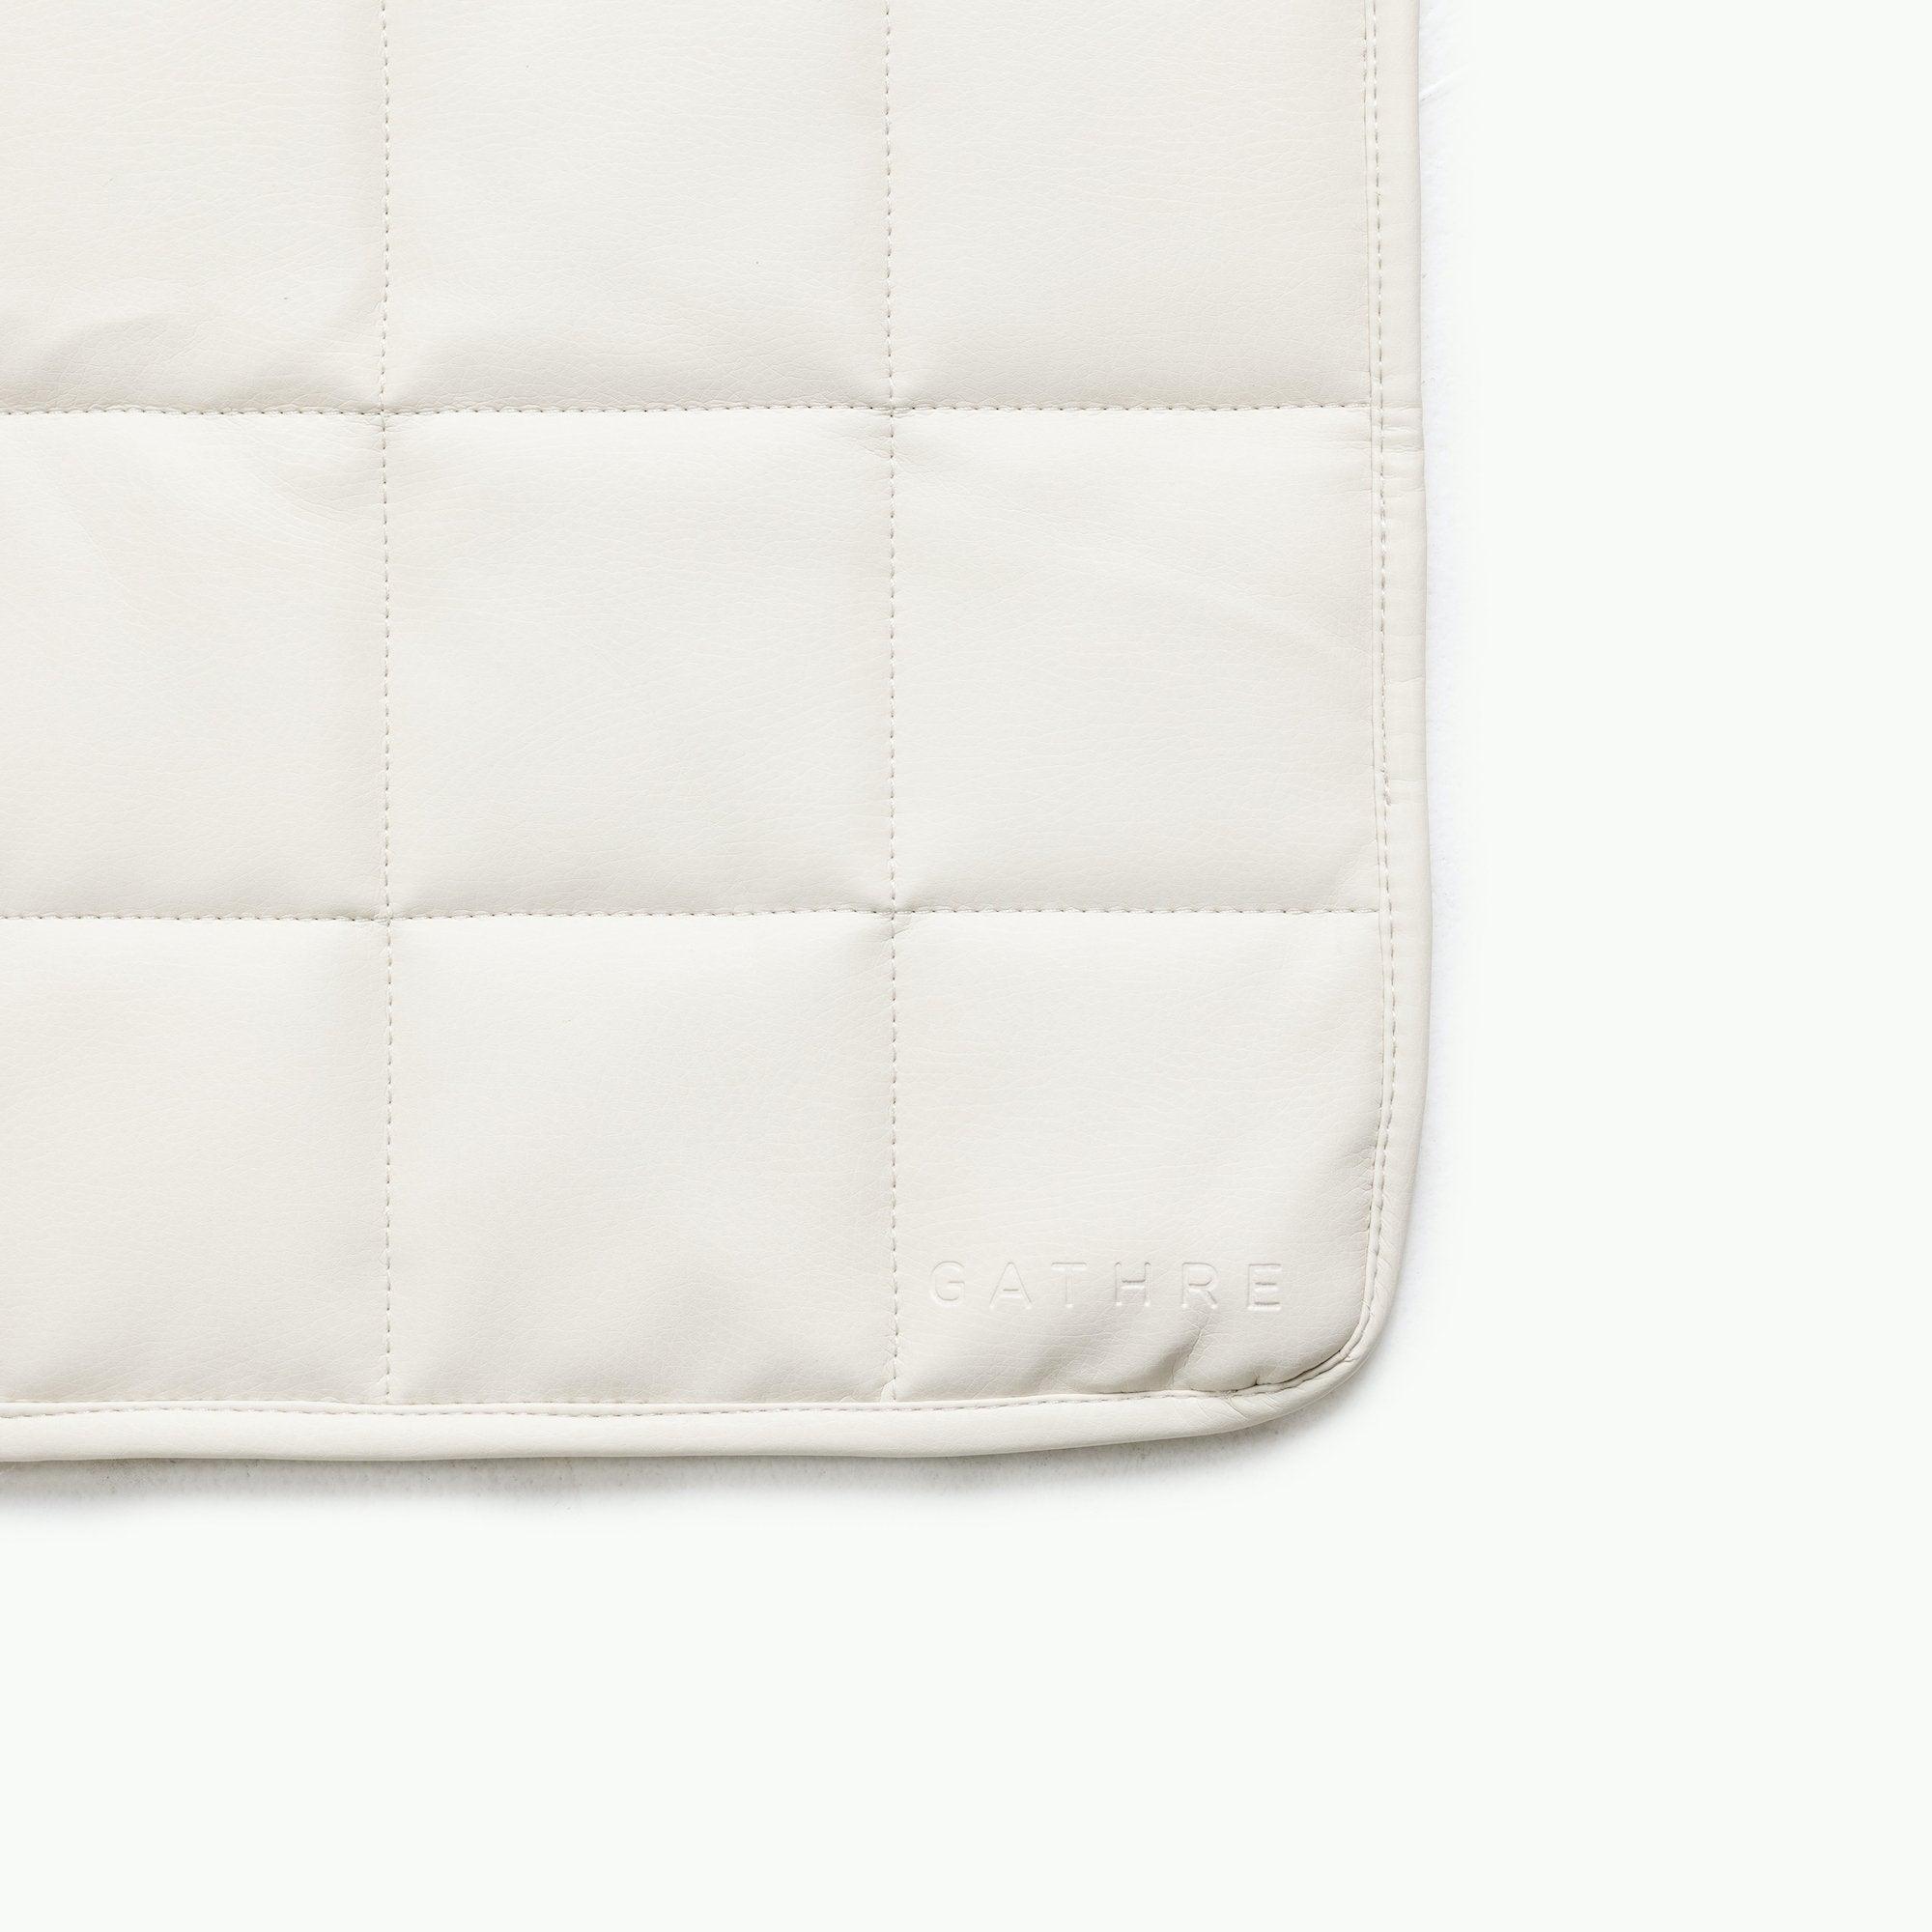 Ivory / Square@Gathre deboss detail on the Ivory Mini Square Quilted Mat 